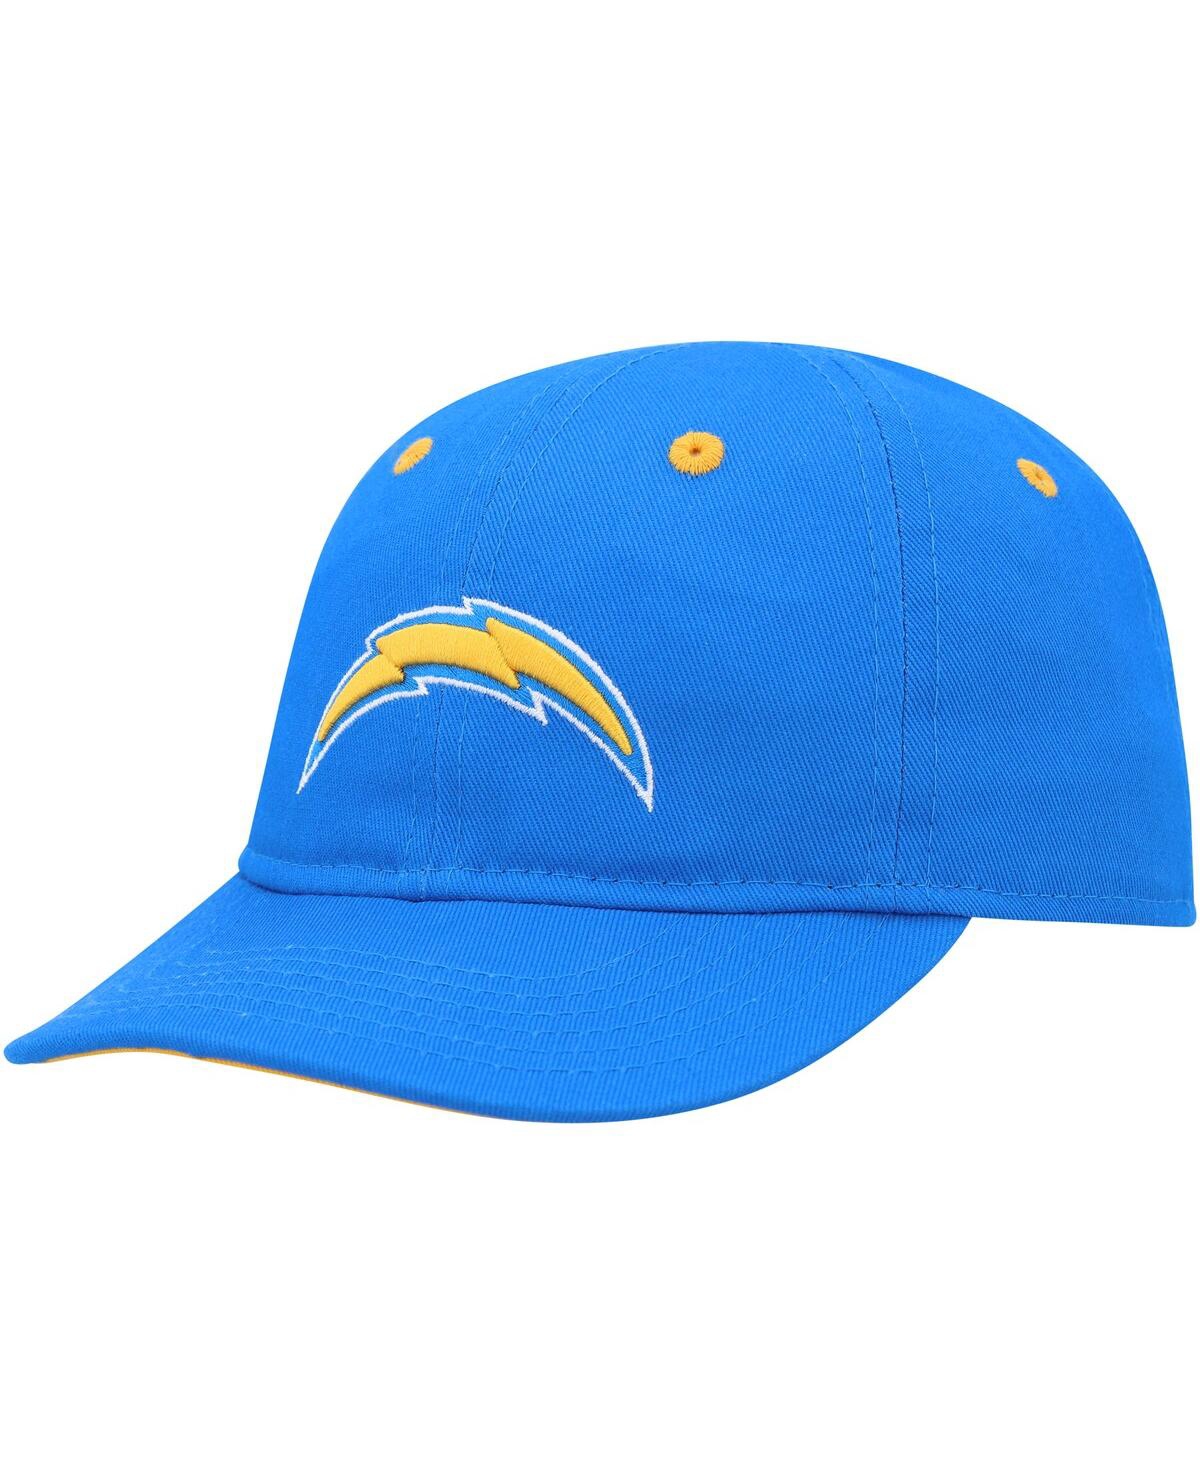 Shop Outerstuff Boys And Girls Infant Powder Blue Los Angeles Chargers Team Slouch Flex Hat